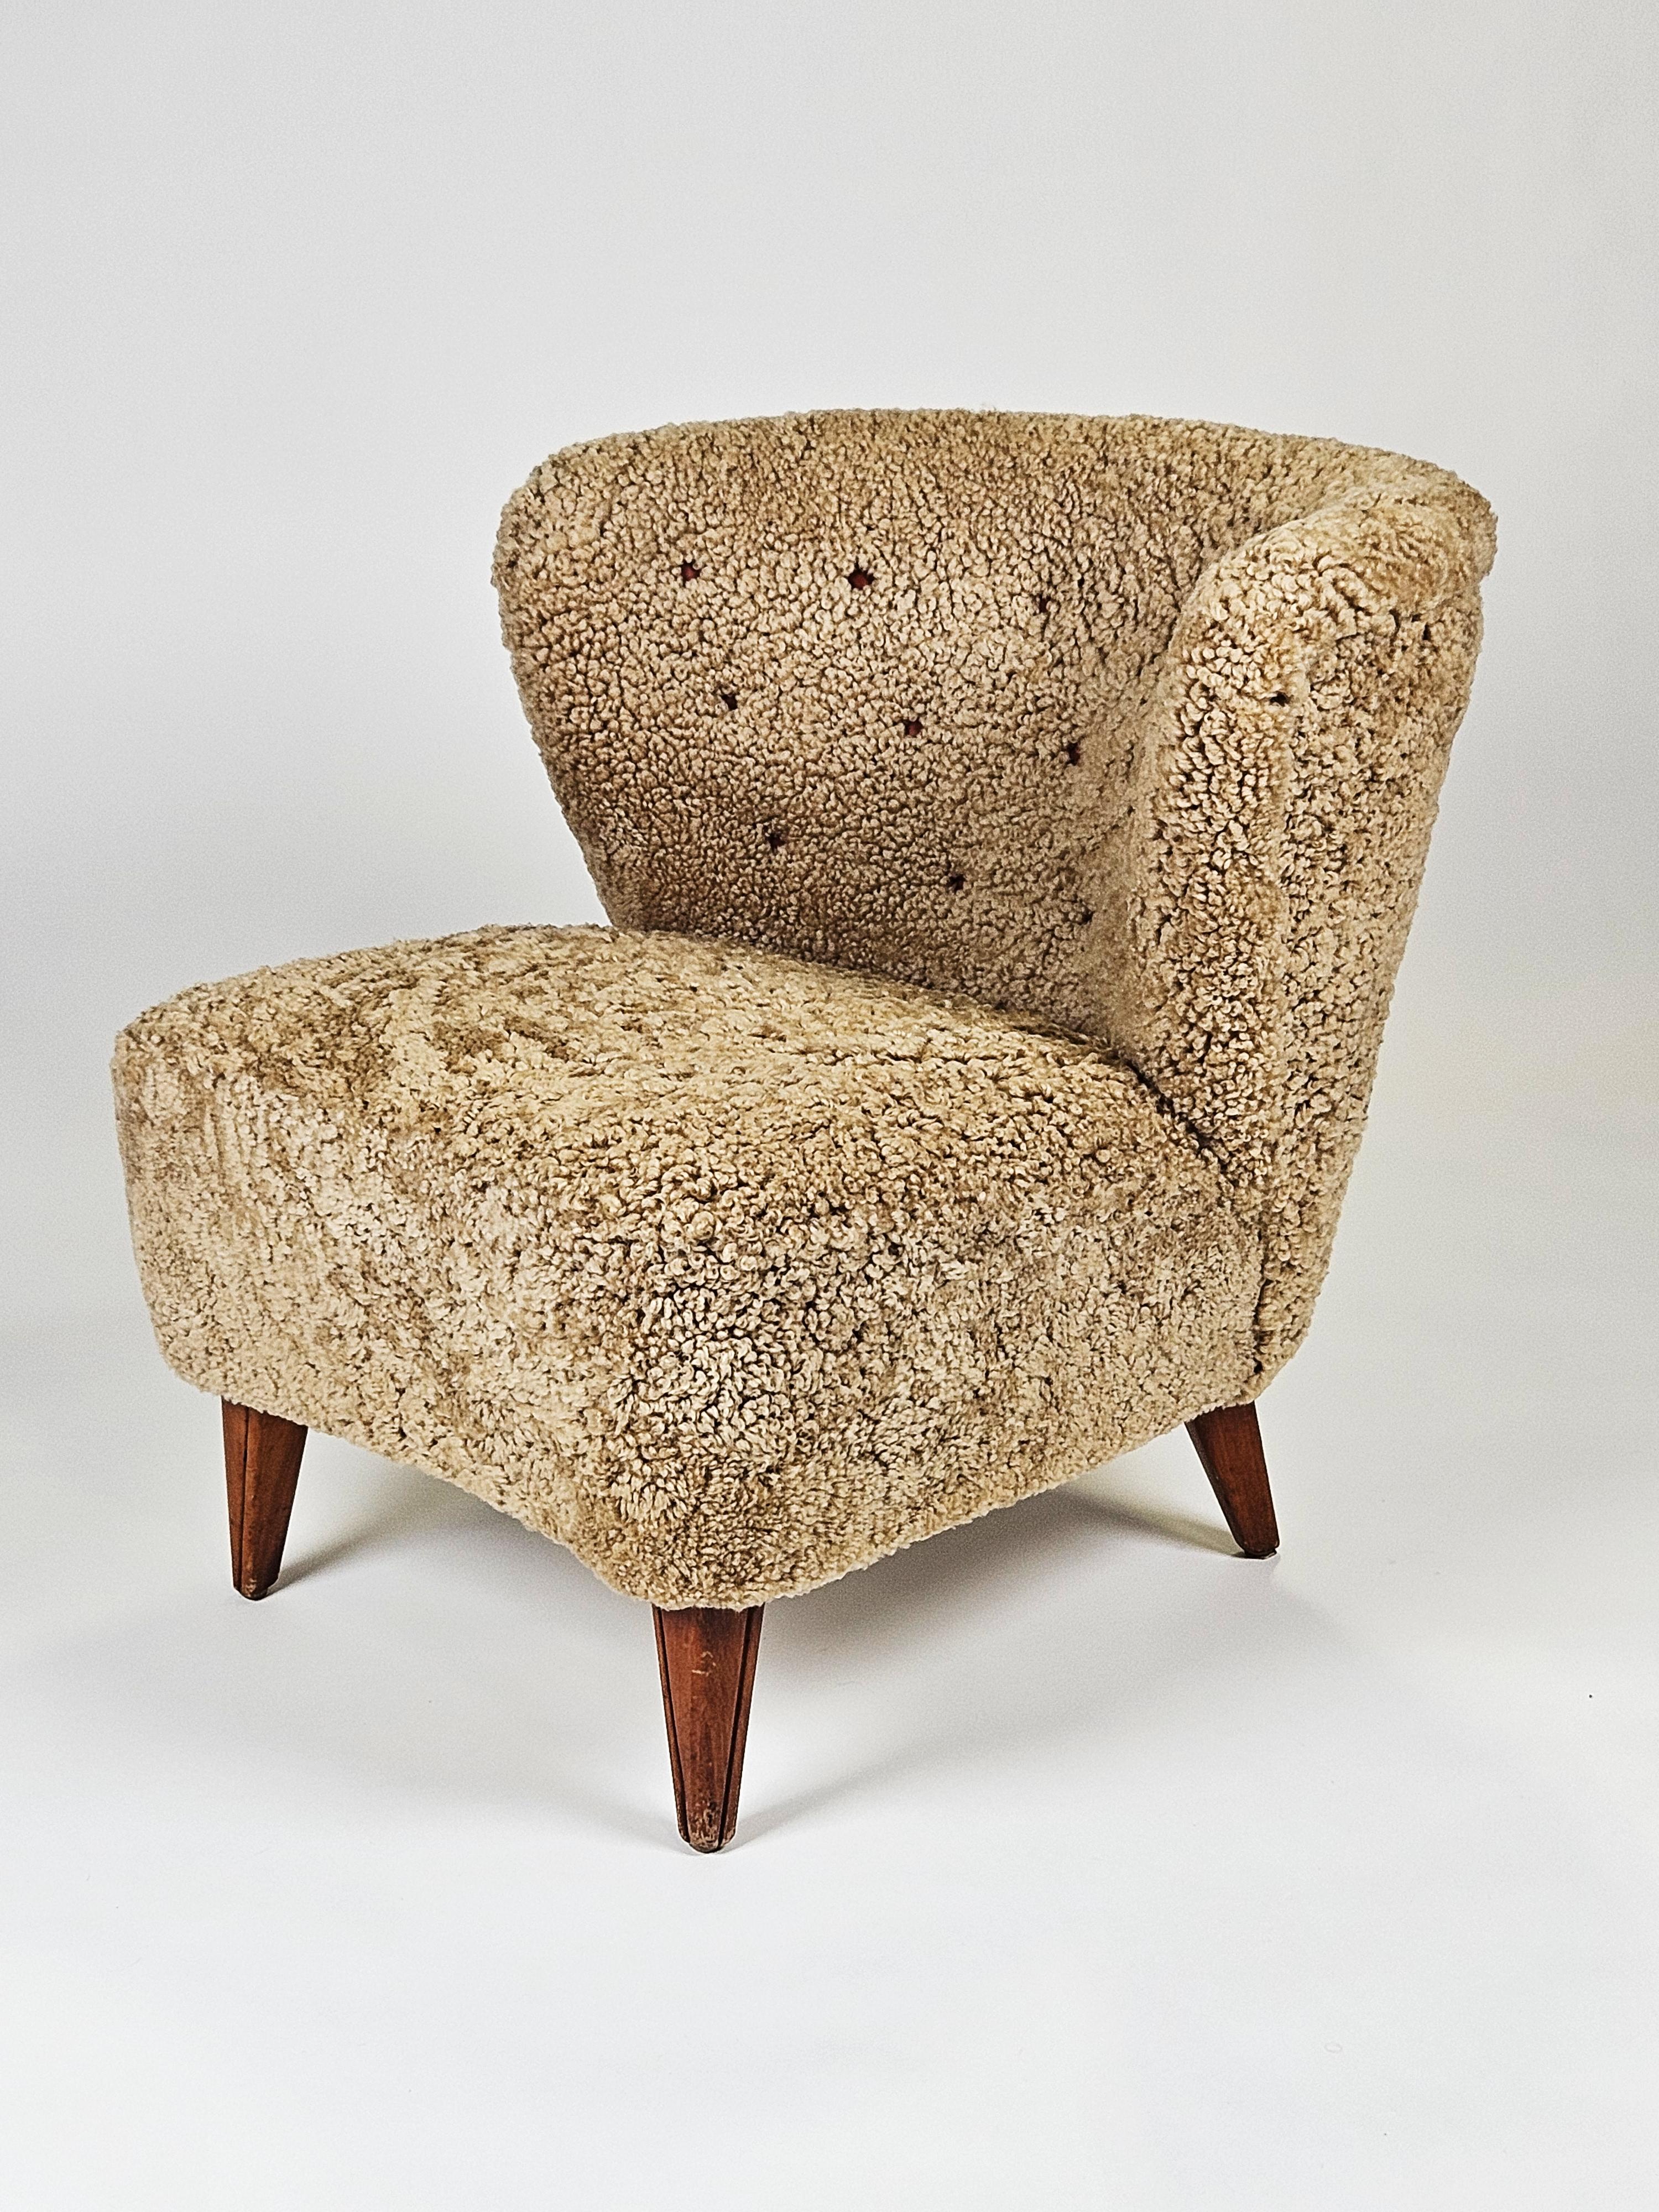 Chunky lounge chair designed and made by Gösta Jonsson, Sweden, during the 1950s. 

Upholstered with honey colored sheepskin. 

Clean modernistic design. Truly a Scandinavian Modern piece. 